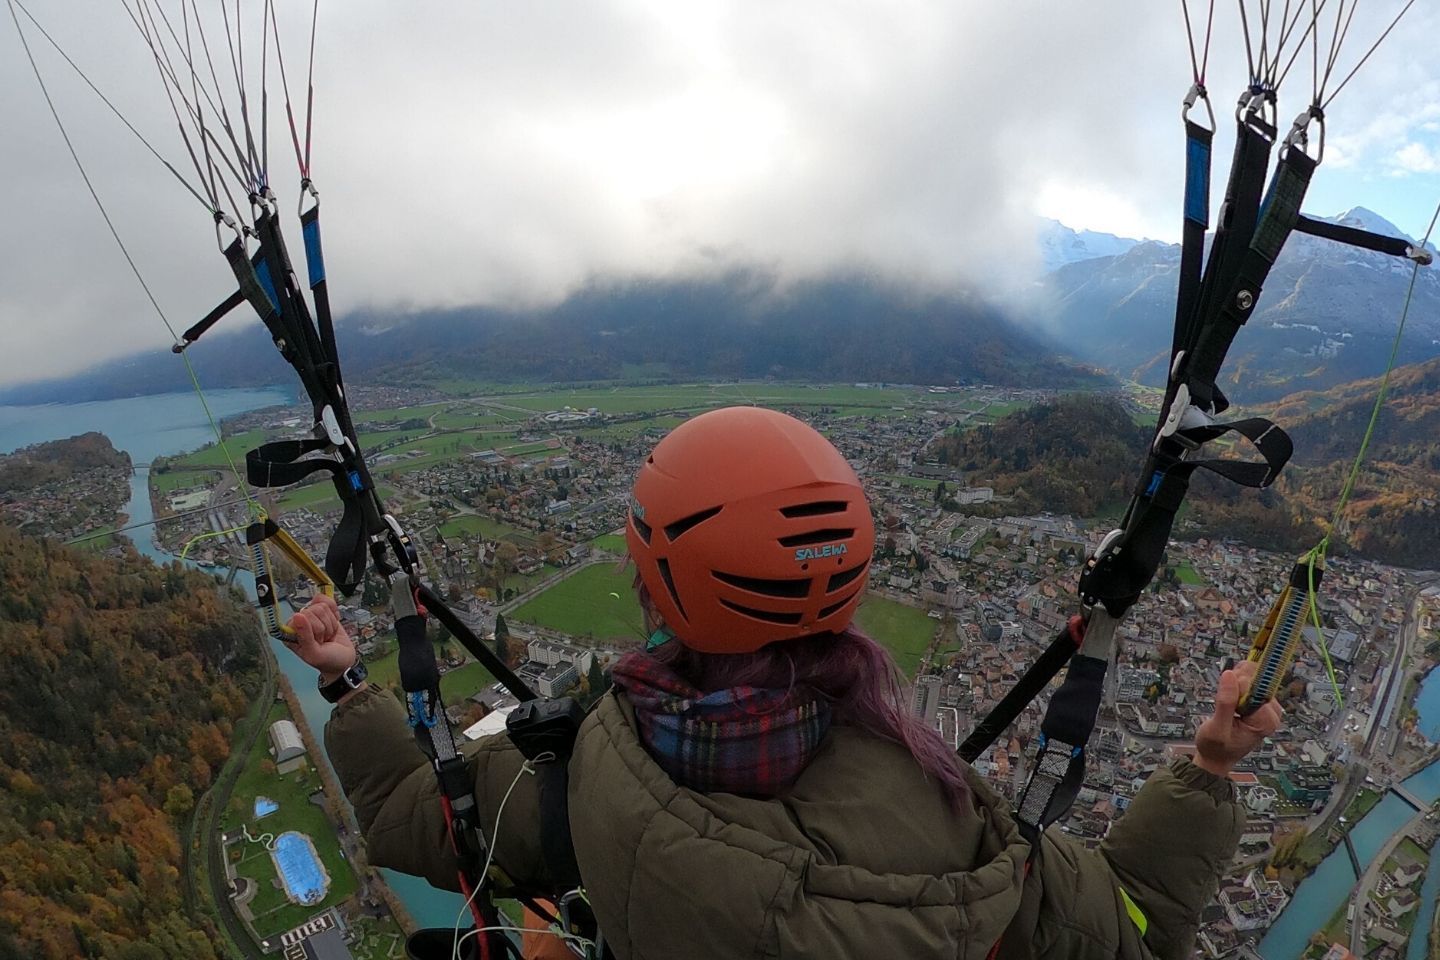 steering the paraglider